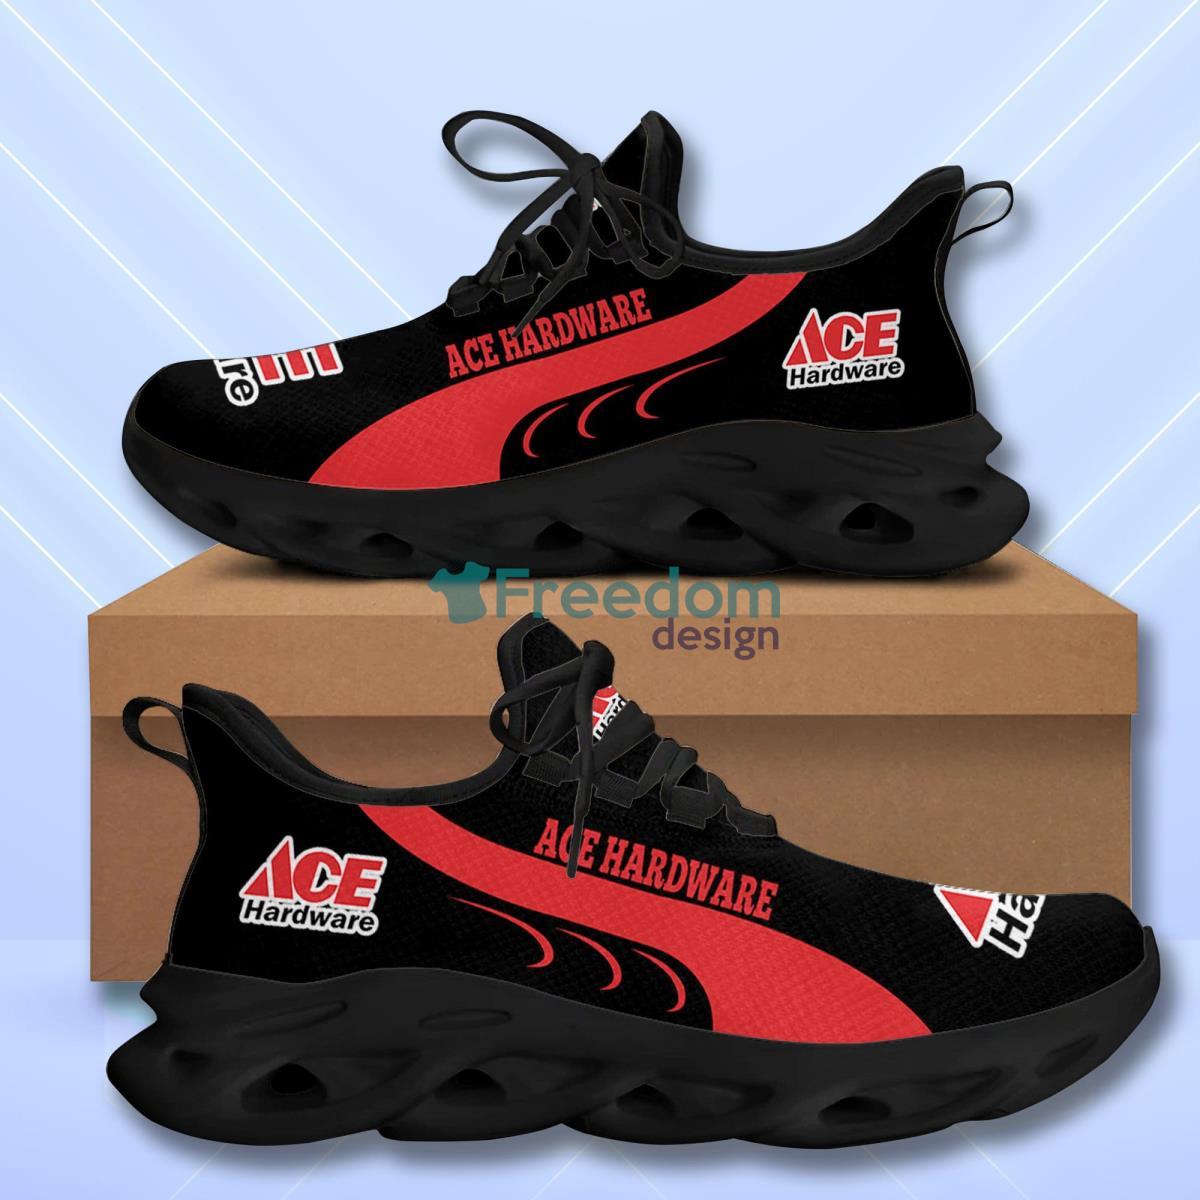 ACE Hardware Max Soul Shoes Hot Trending Best Gift For Men Women Product Photo 1